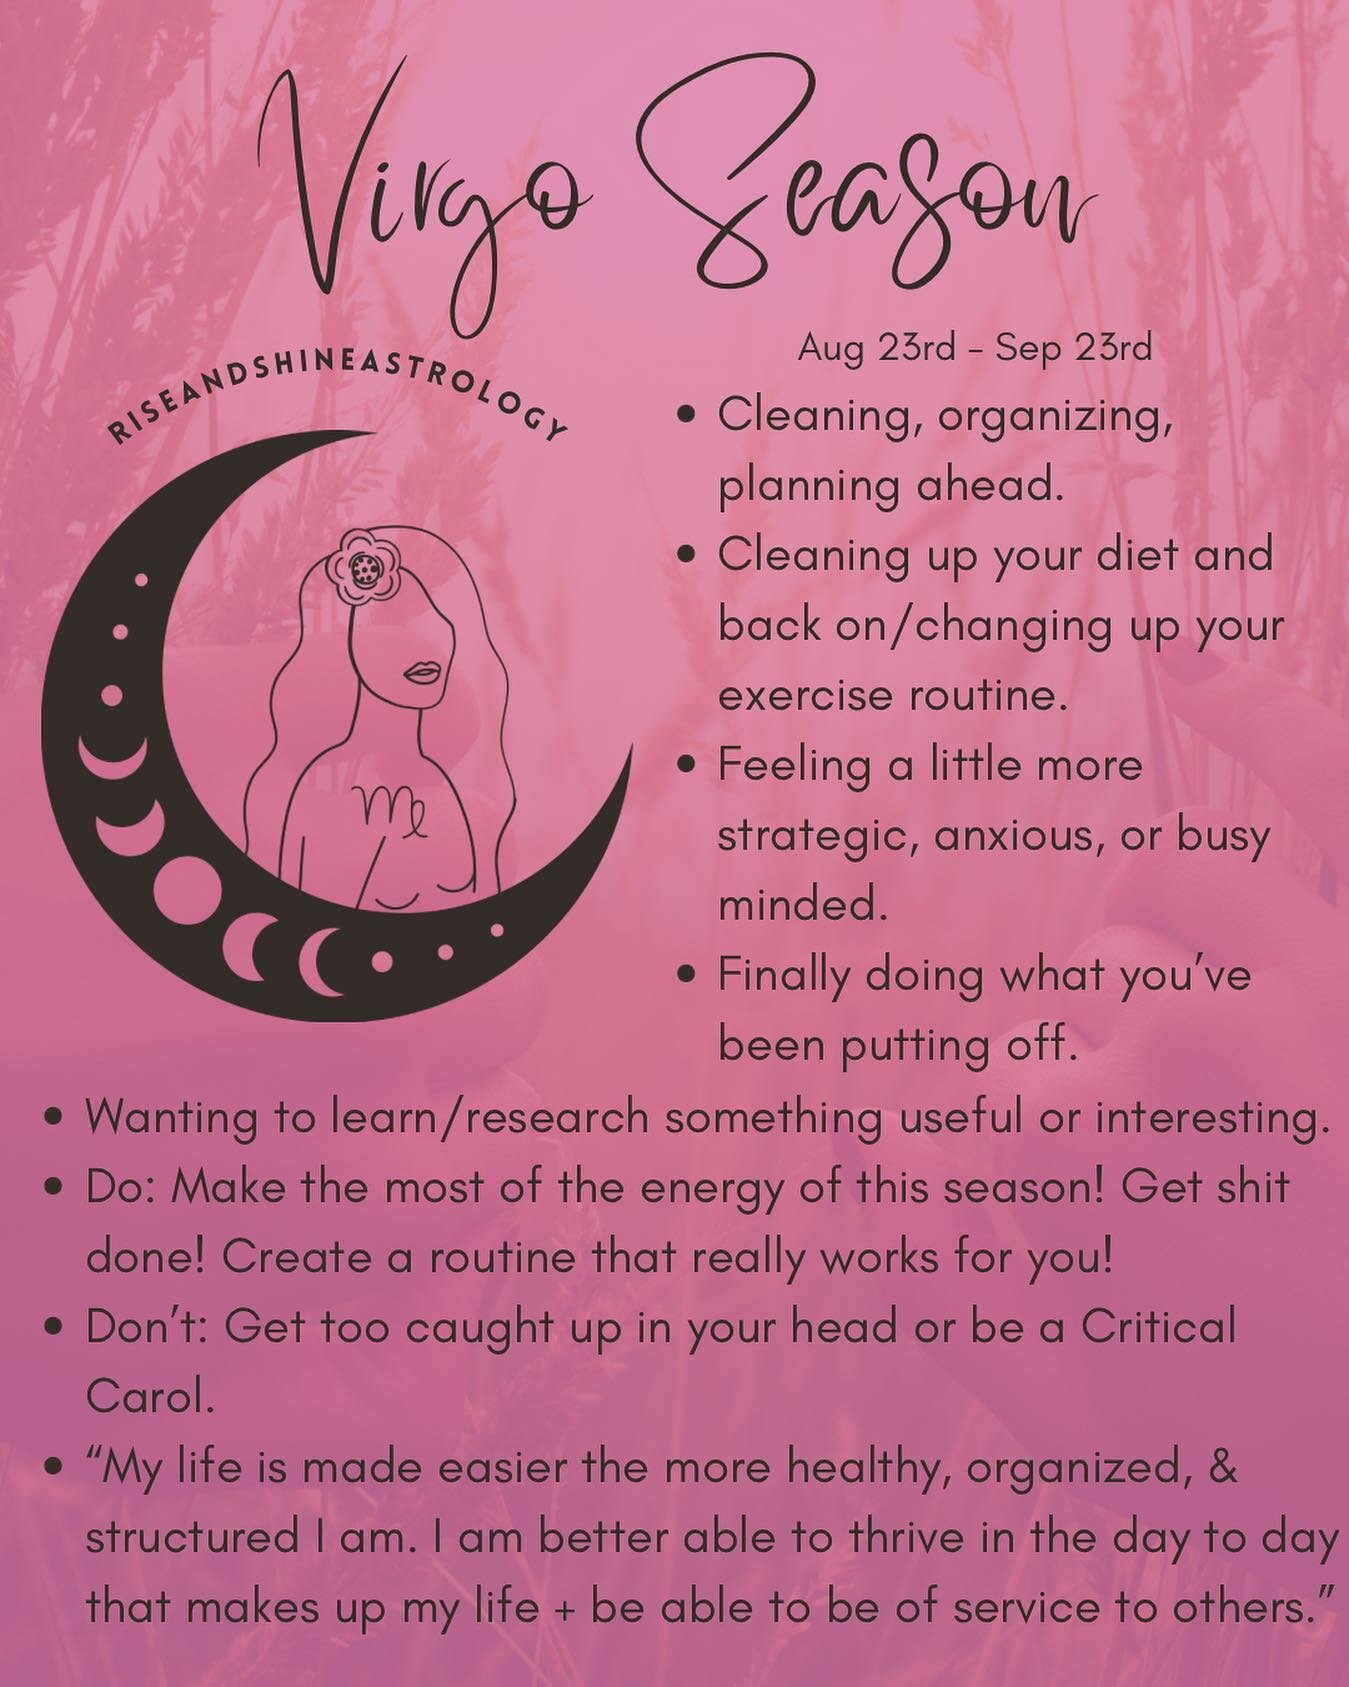 Virgo Season is now underway!
Here&rsquo;s how it will likely feel for you in general 👆, and here&rsquo;s some other themes you might be experiencing based on your sun, moon, &amp; rising sign (read each, though rising sign is most important) 👇 
Vi